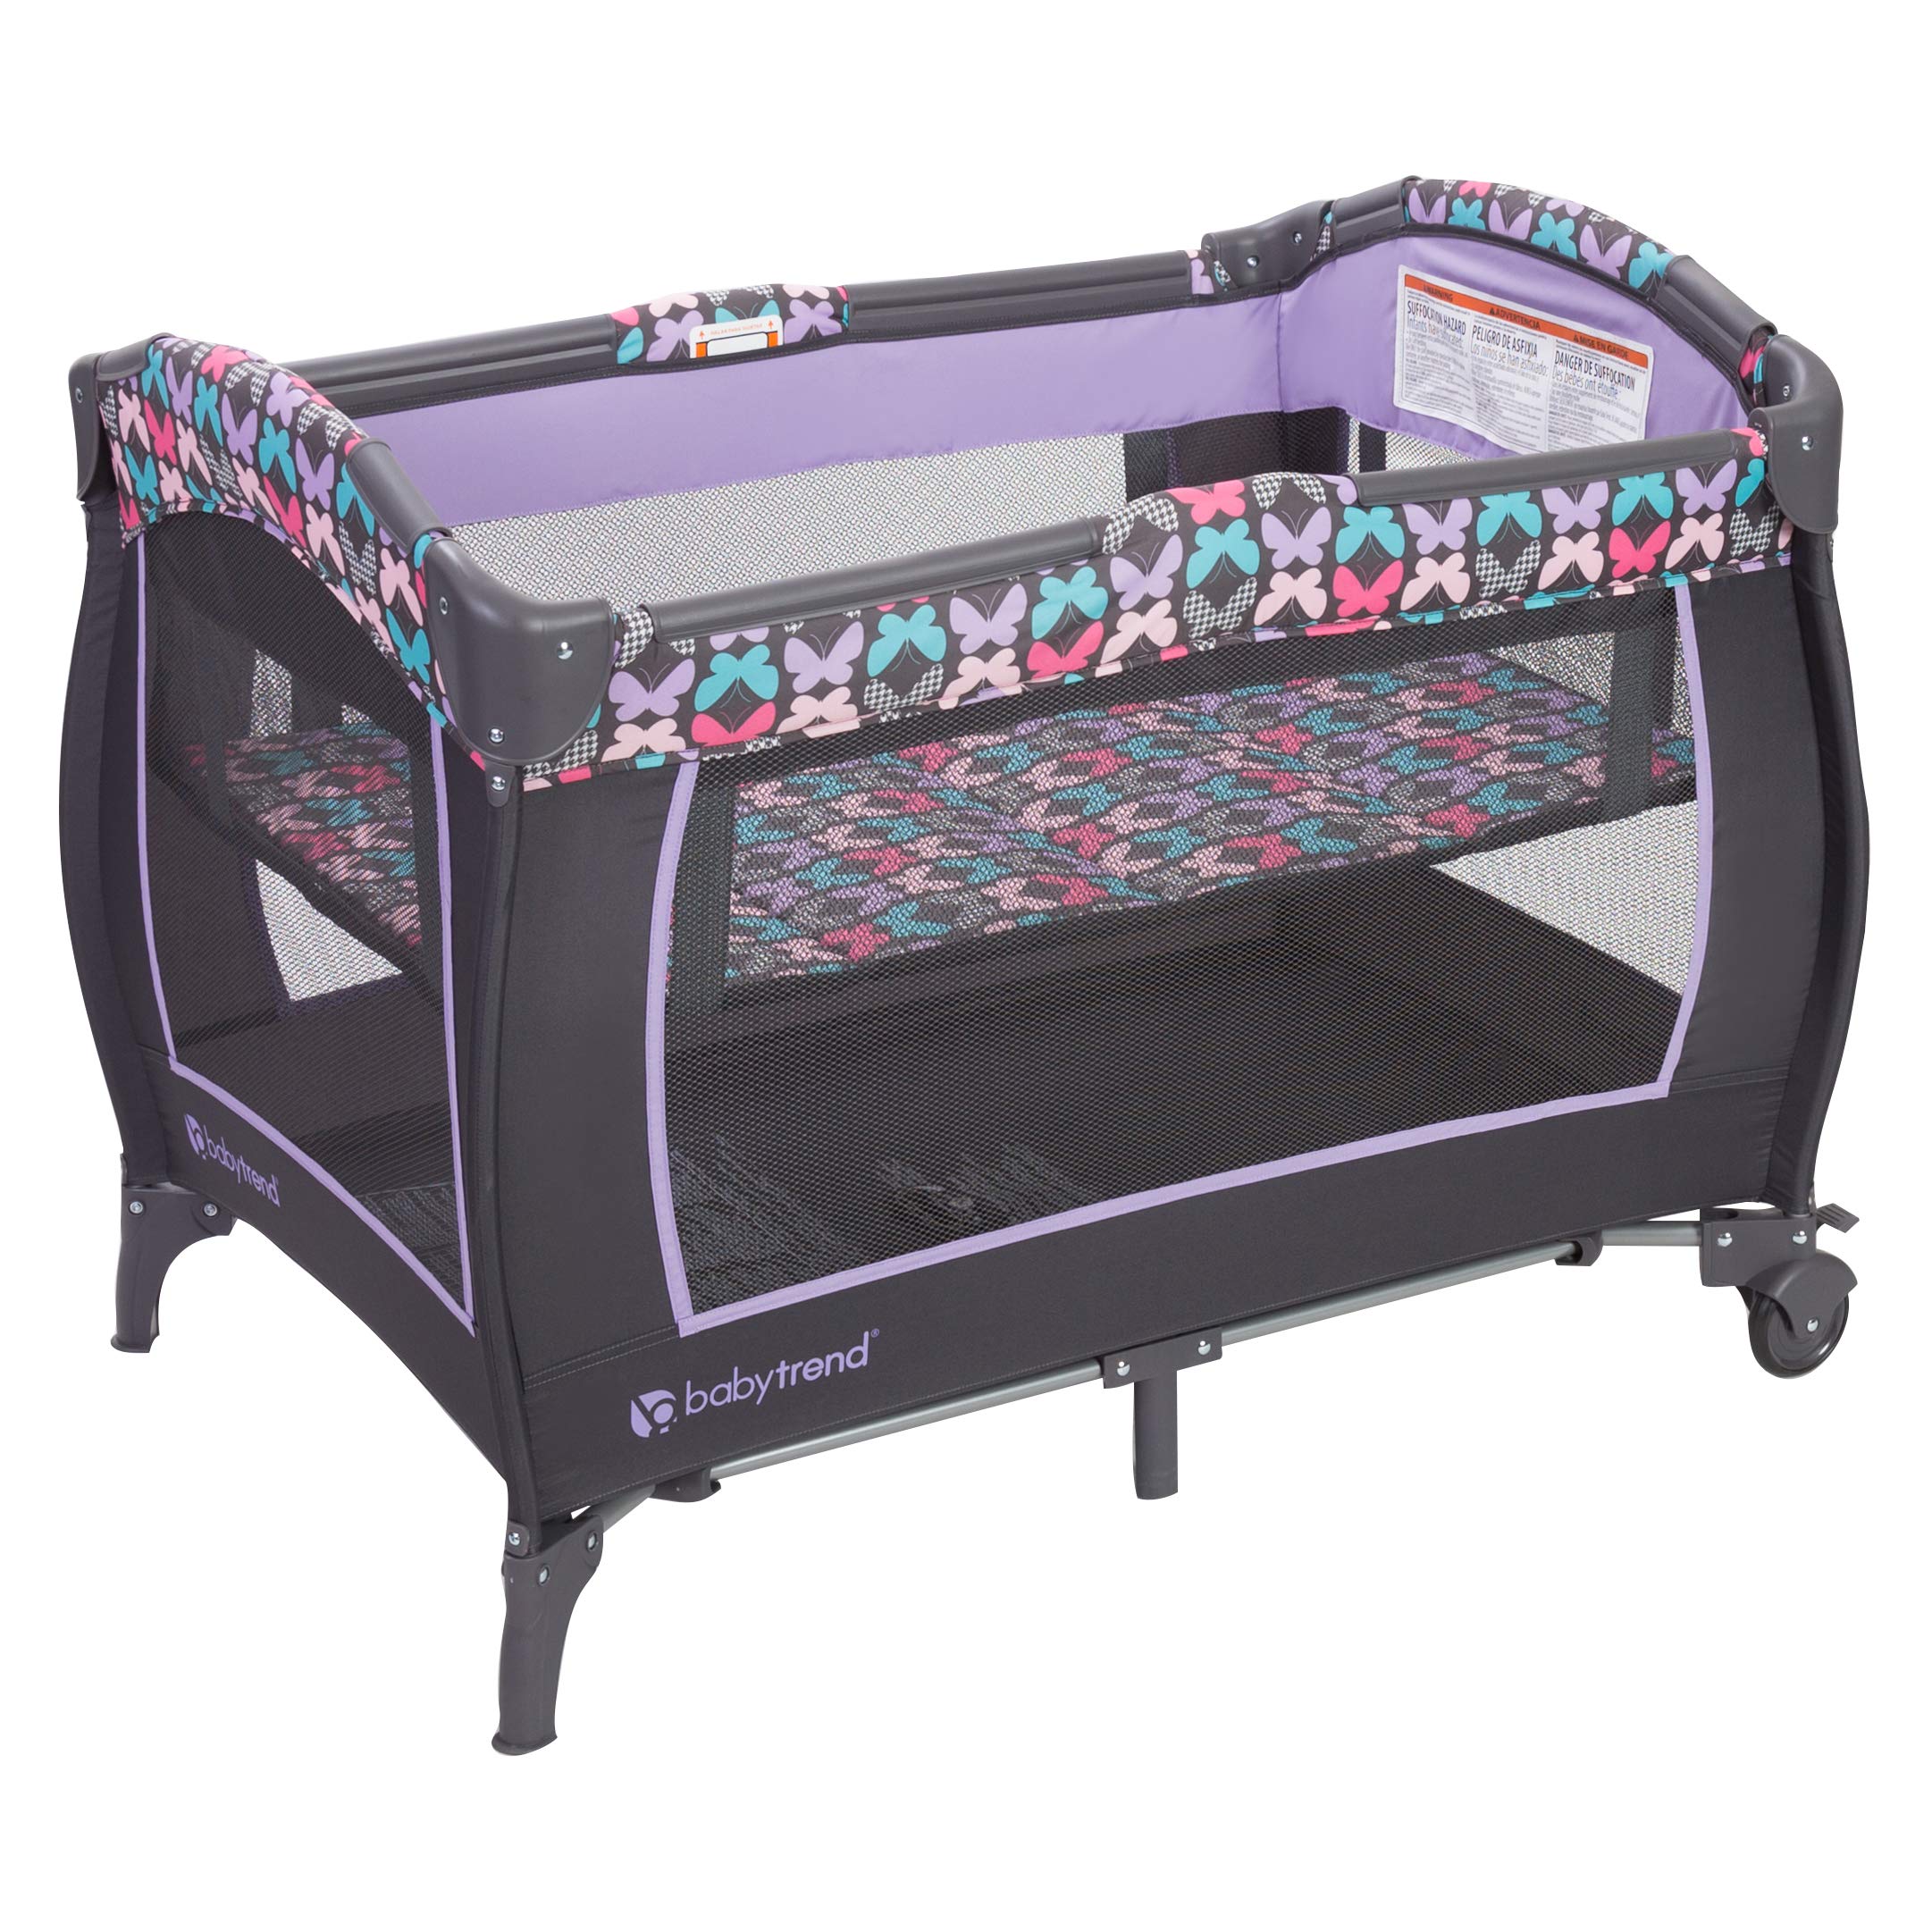 Baby Trend Portable Folding Infant Trend-E Nursery Center with Bassinet, Sophia - image 4 of 9